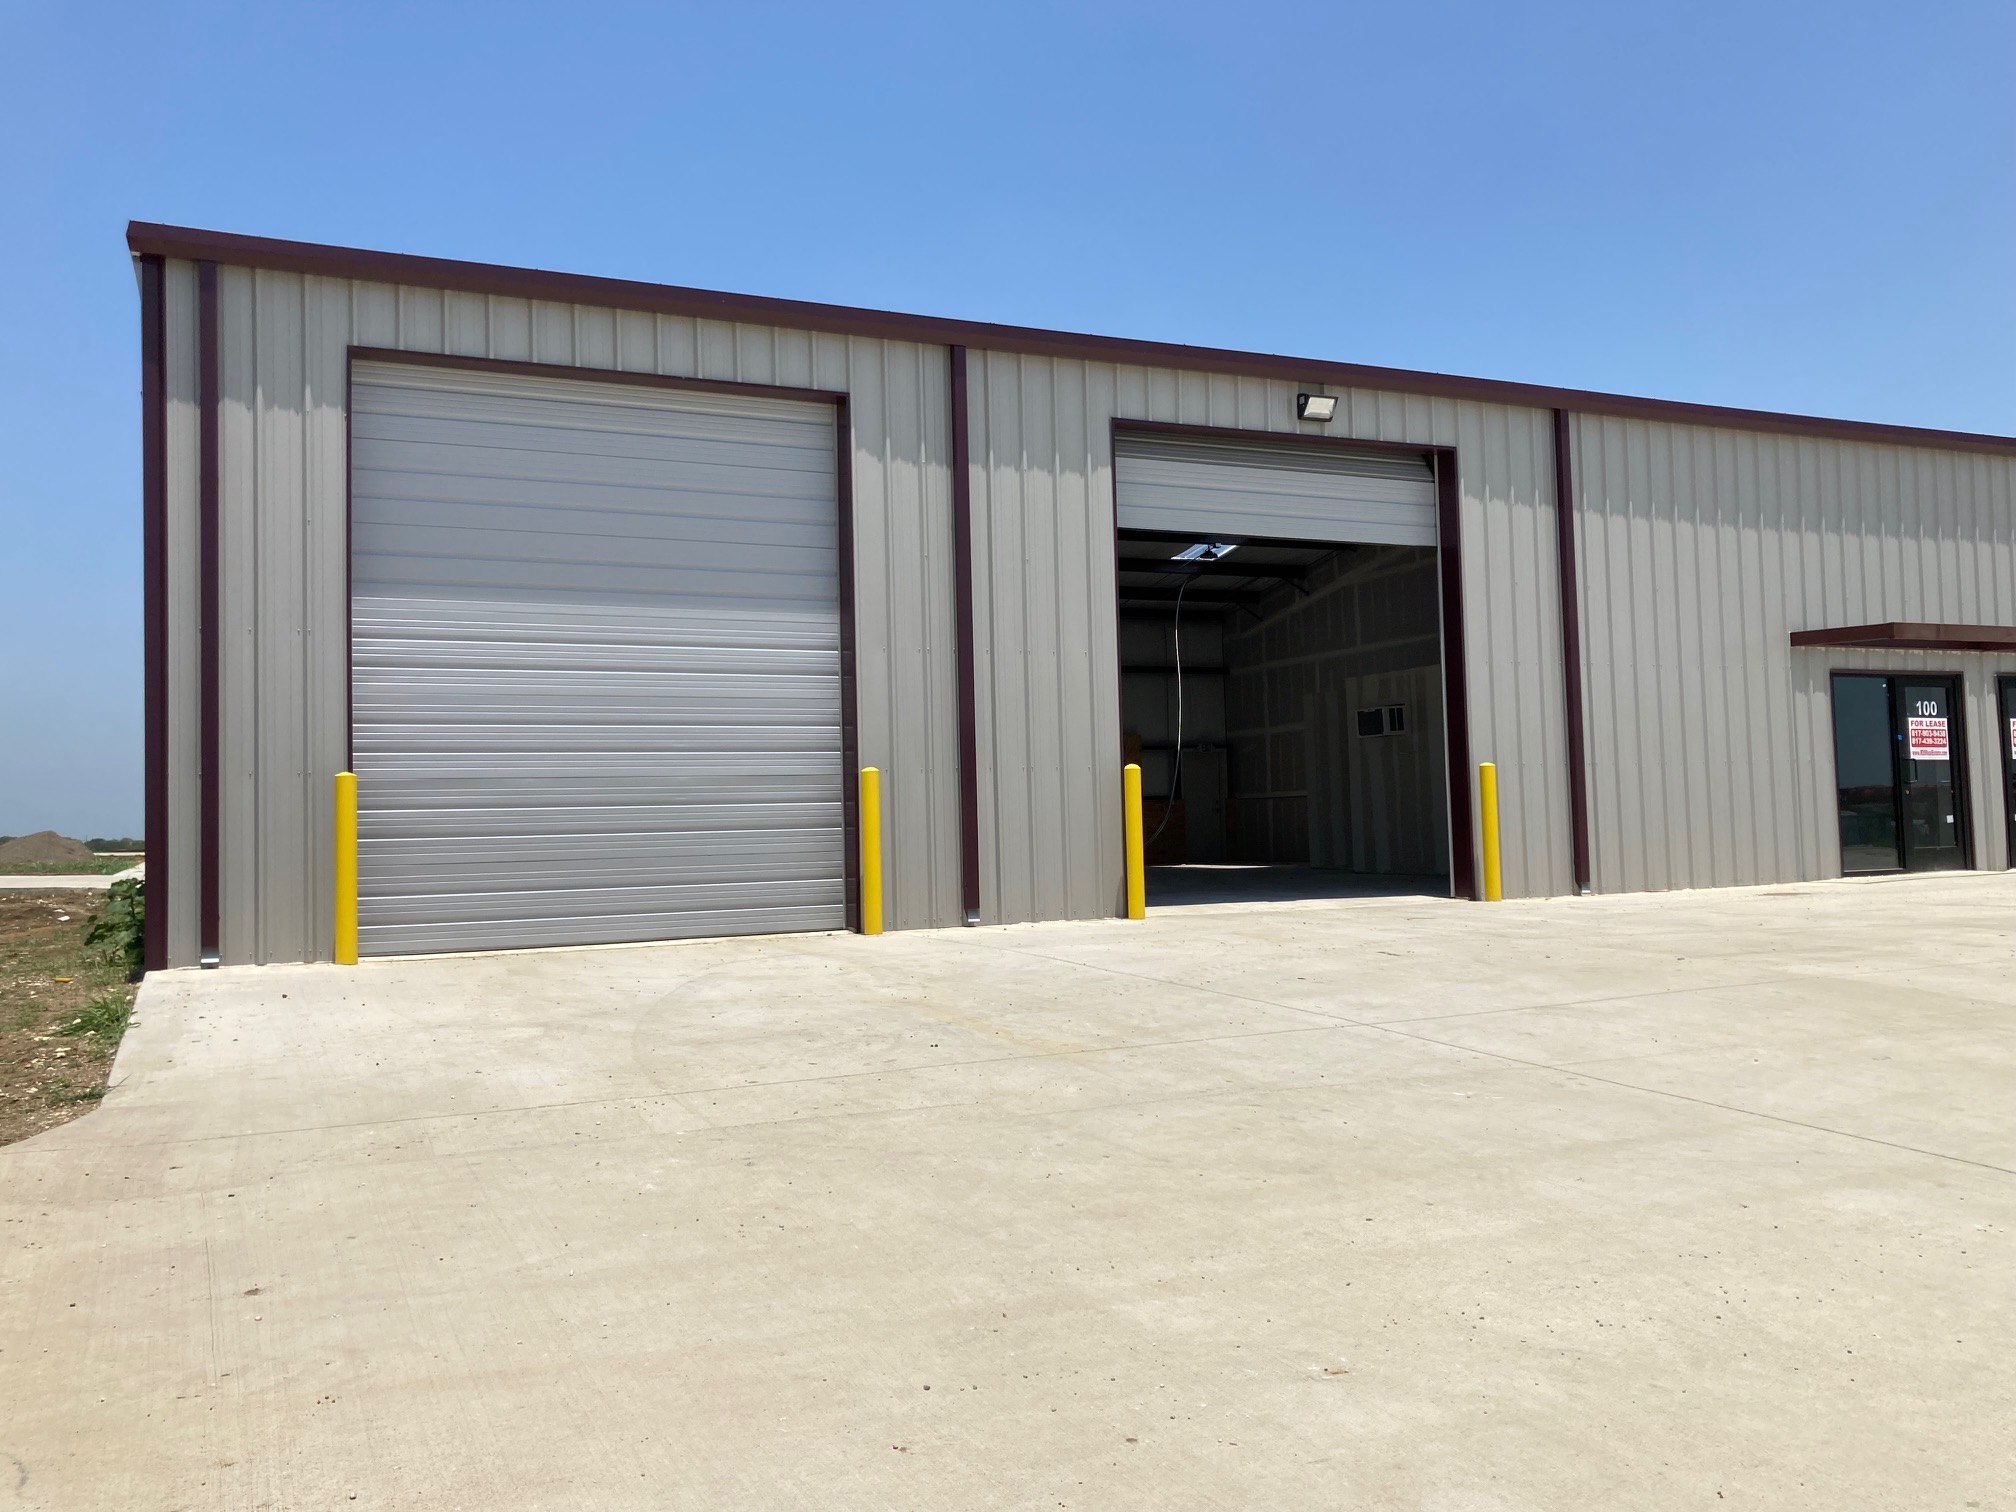 4576 JD Mouser Pkwy industrial space for lease